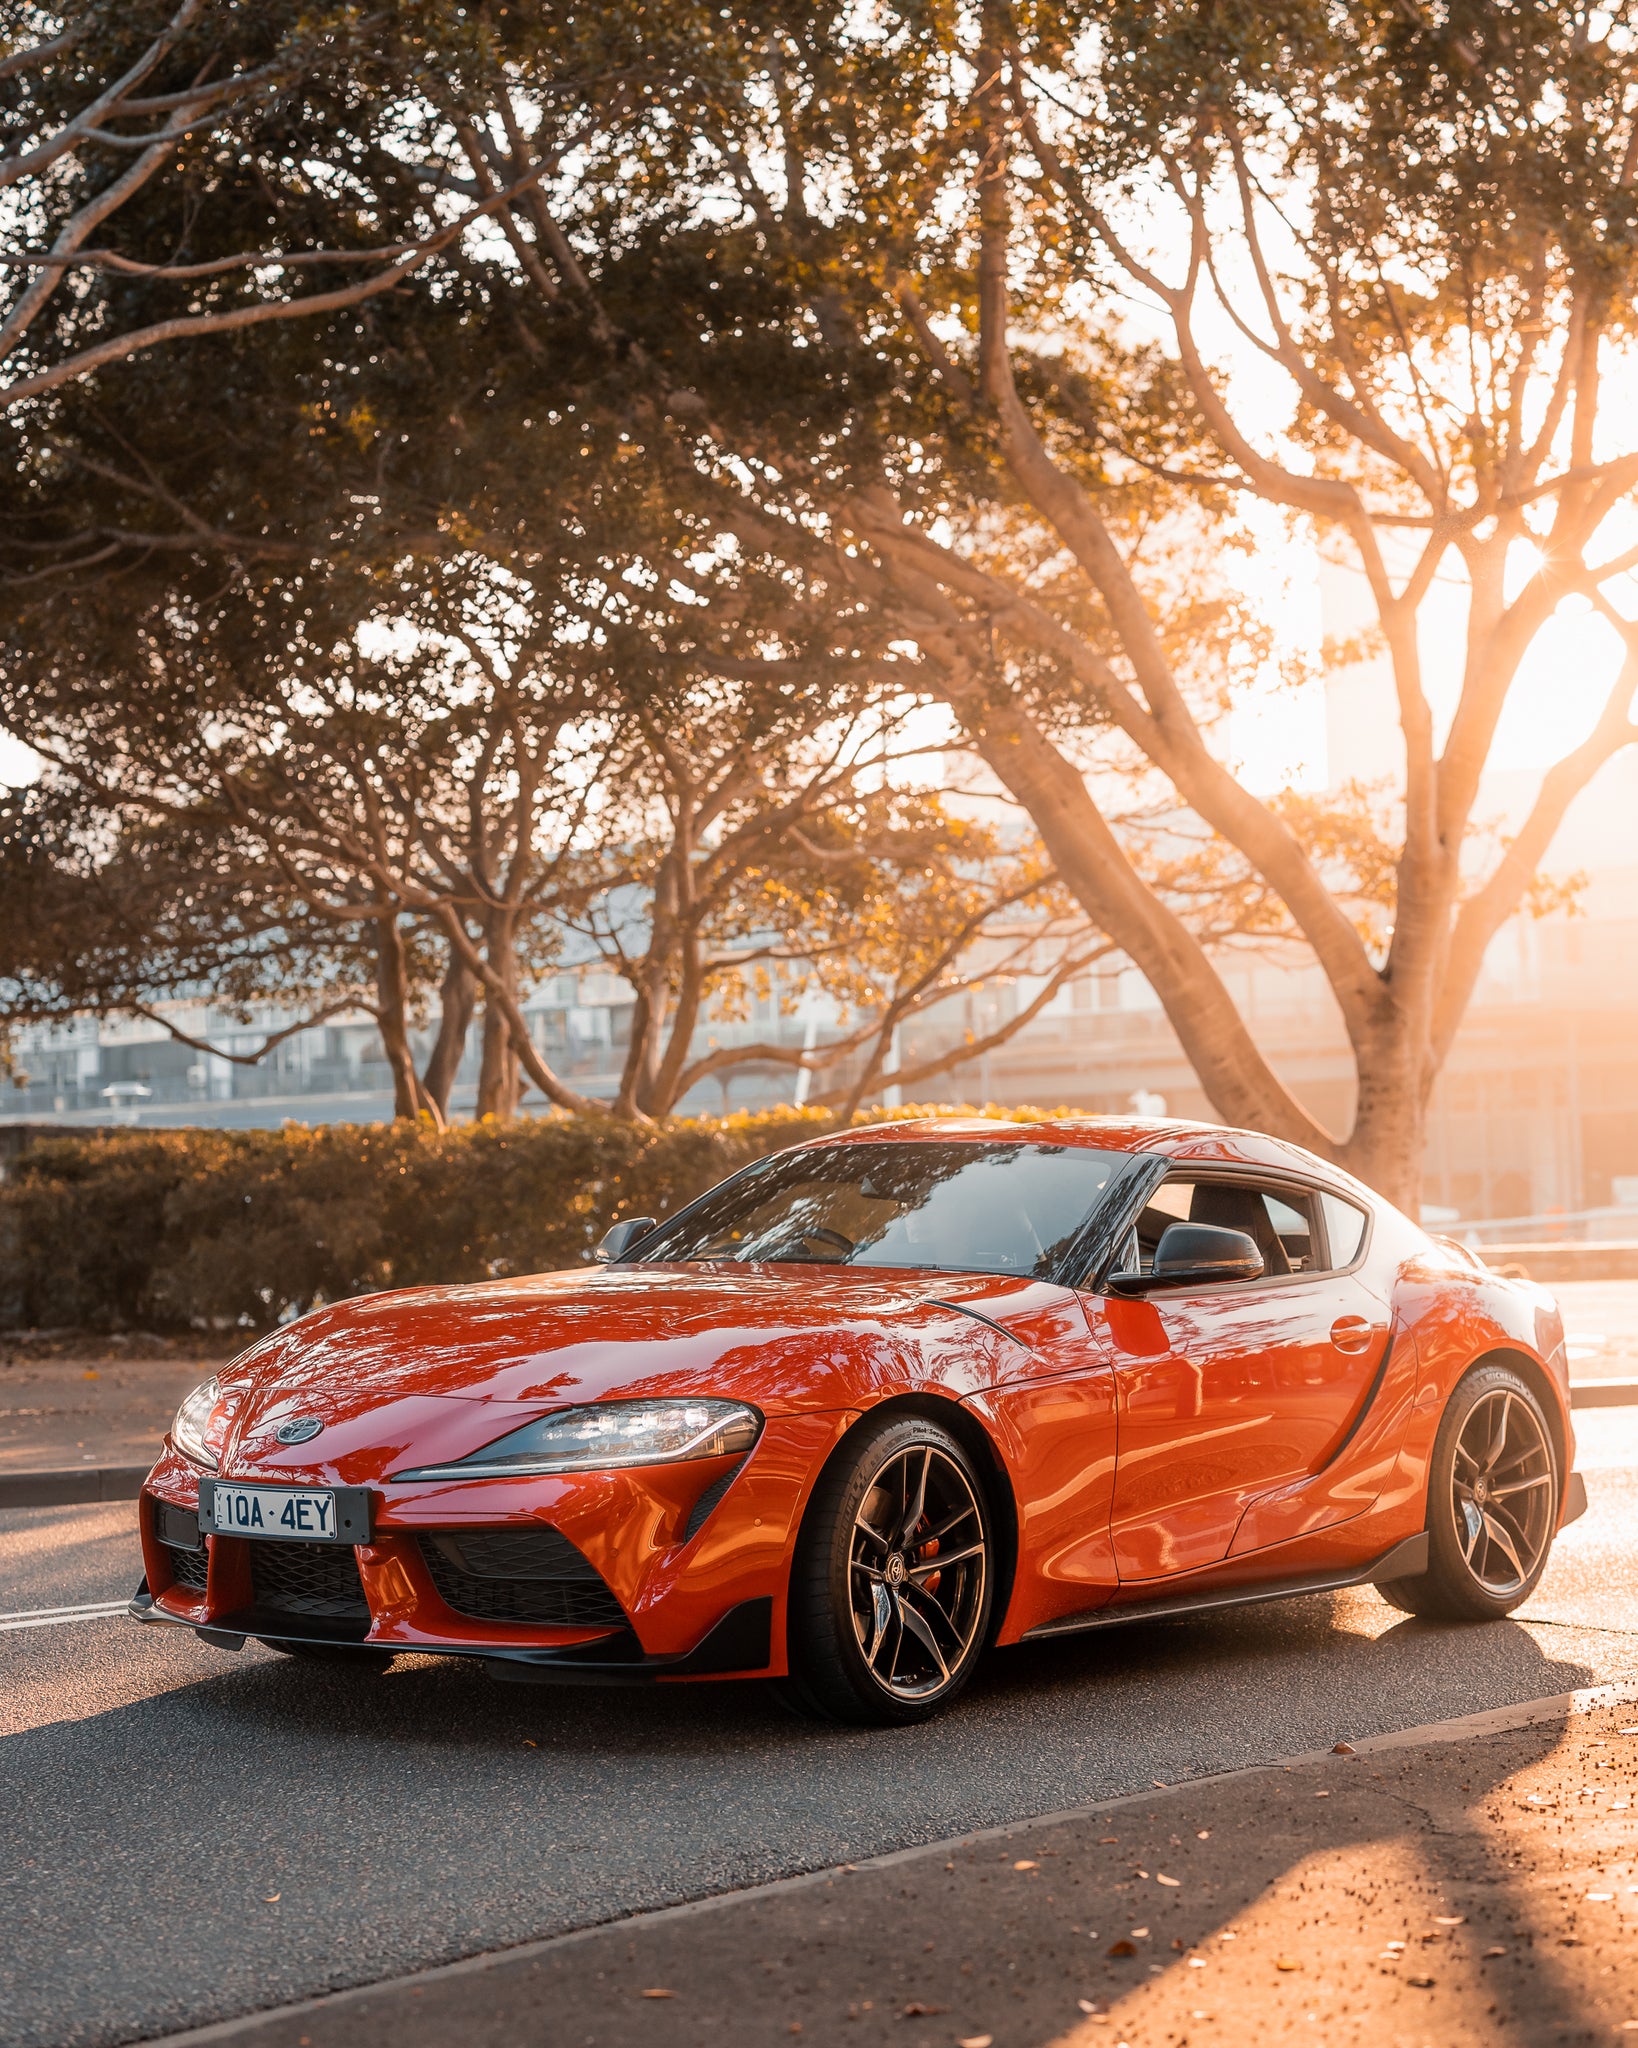 Review: Toyota Supra is a head-turner